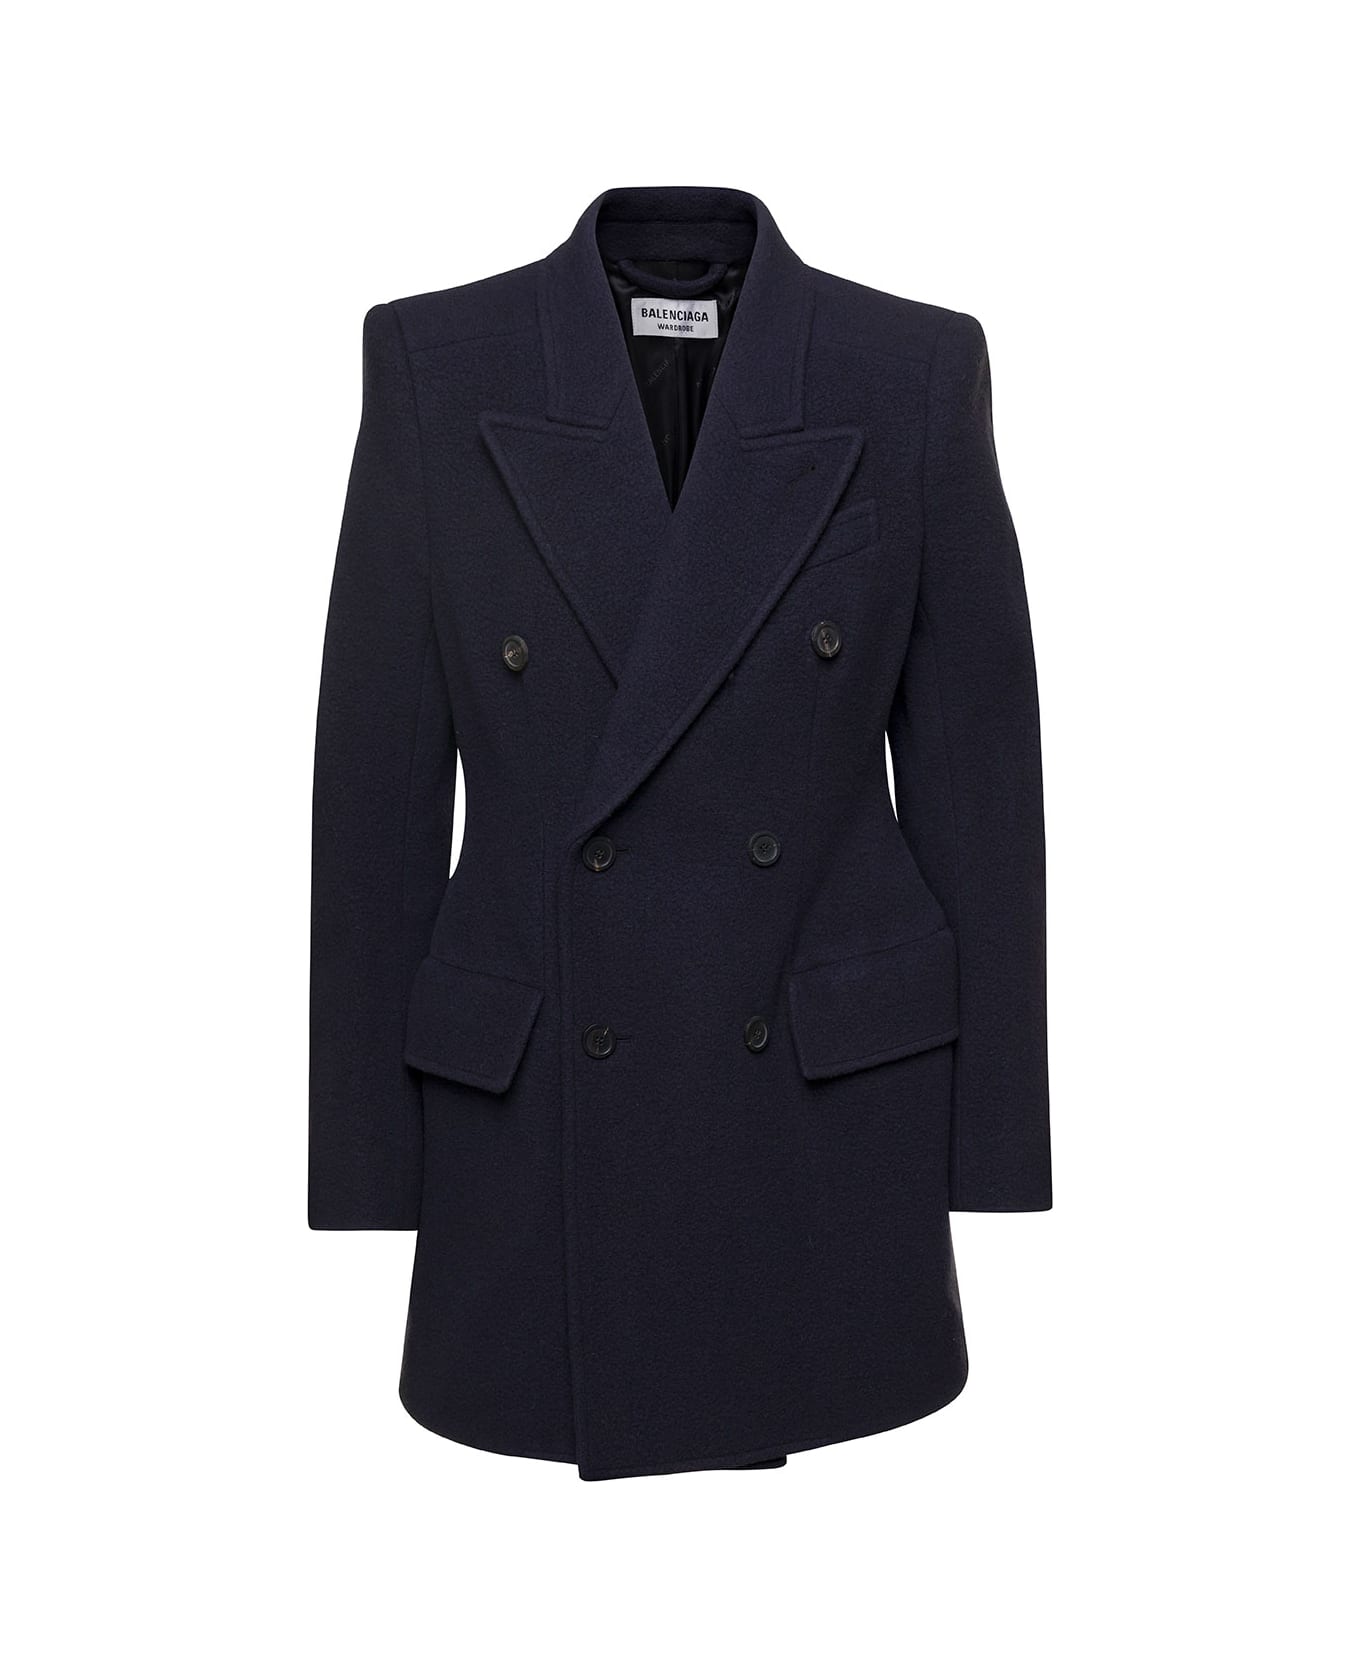 Balenciaga 'hourglass' Blue Double-breasted Jacket With Peaked Revers In Brushed Wool Woman - Blu